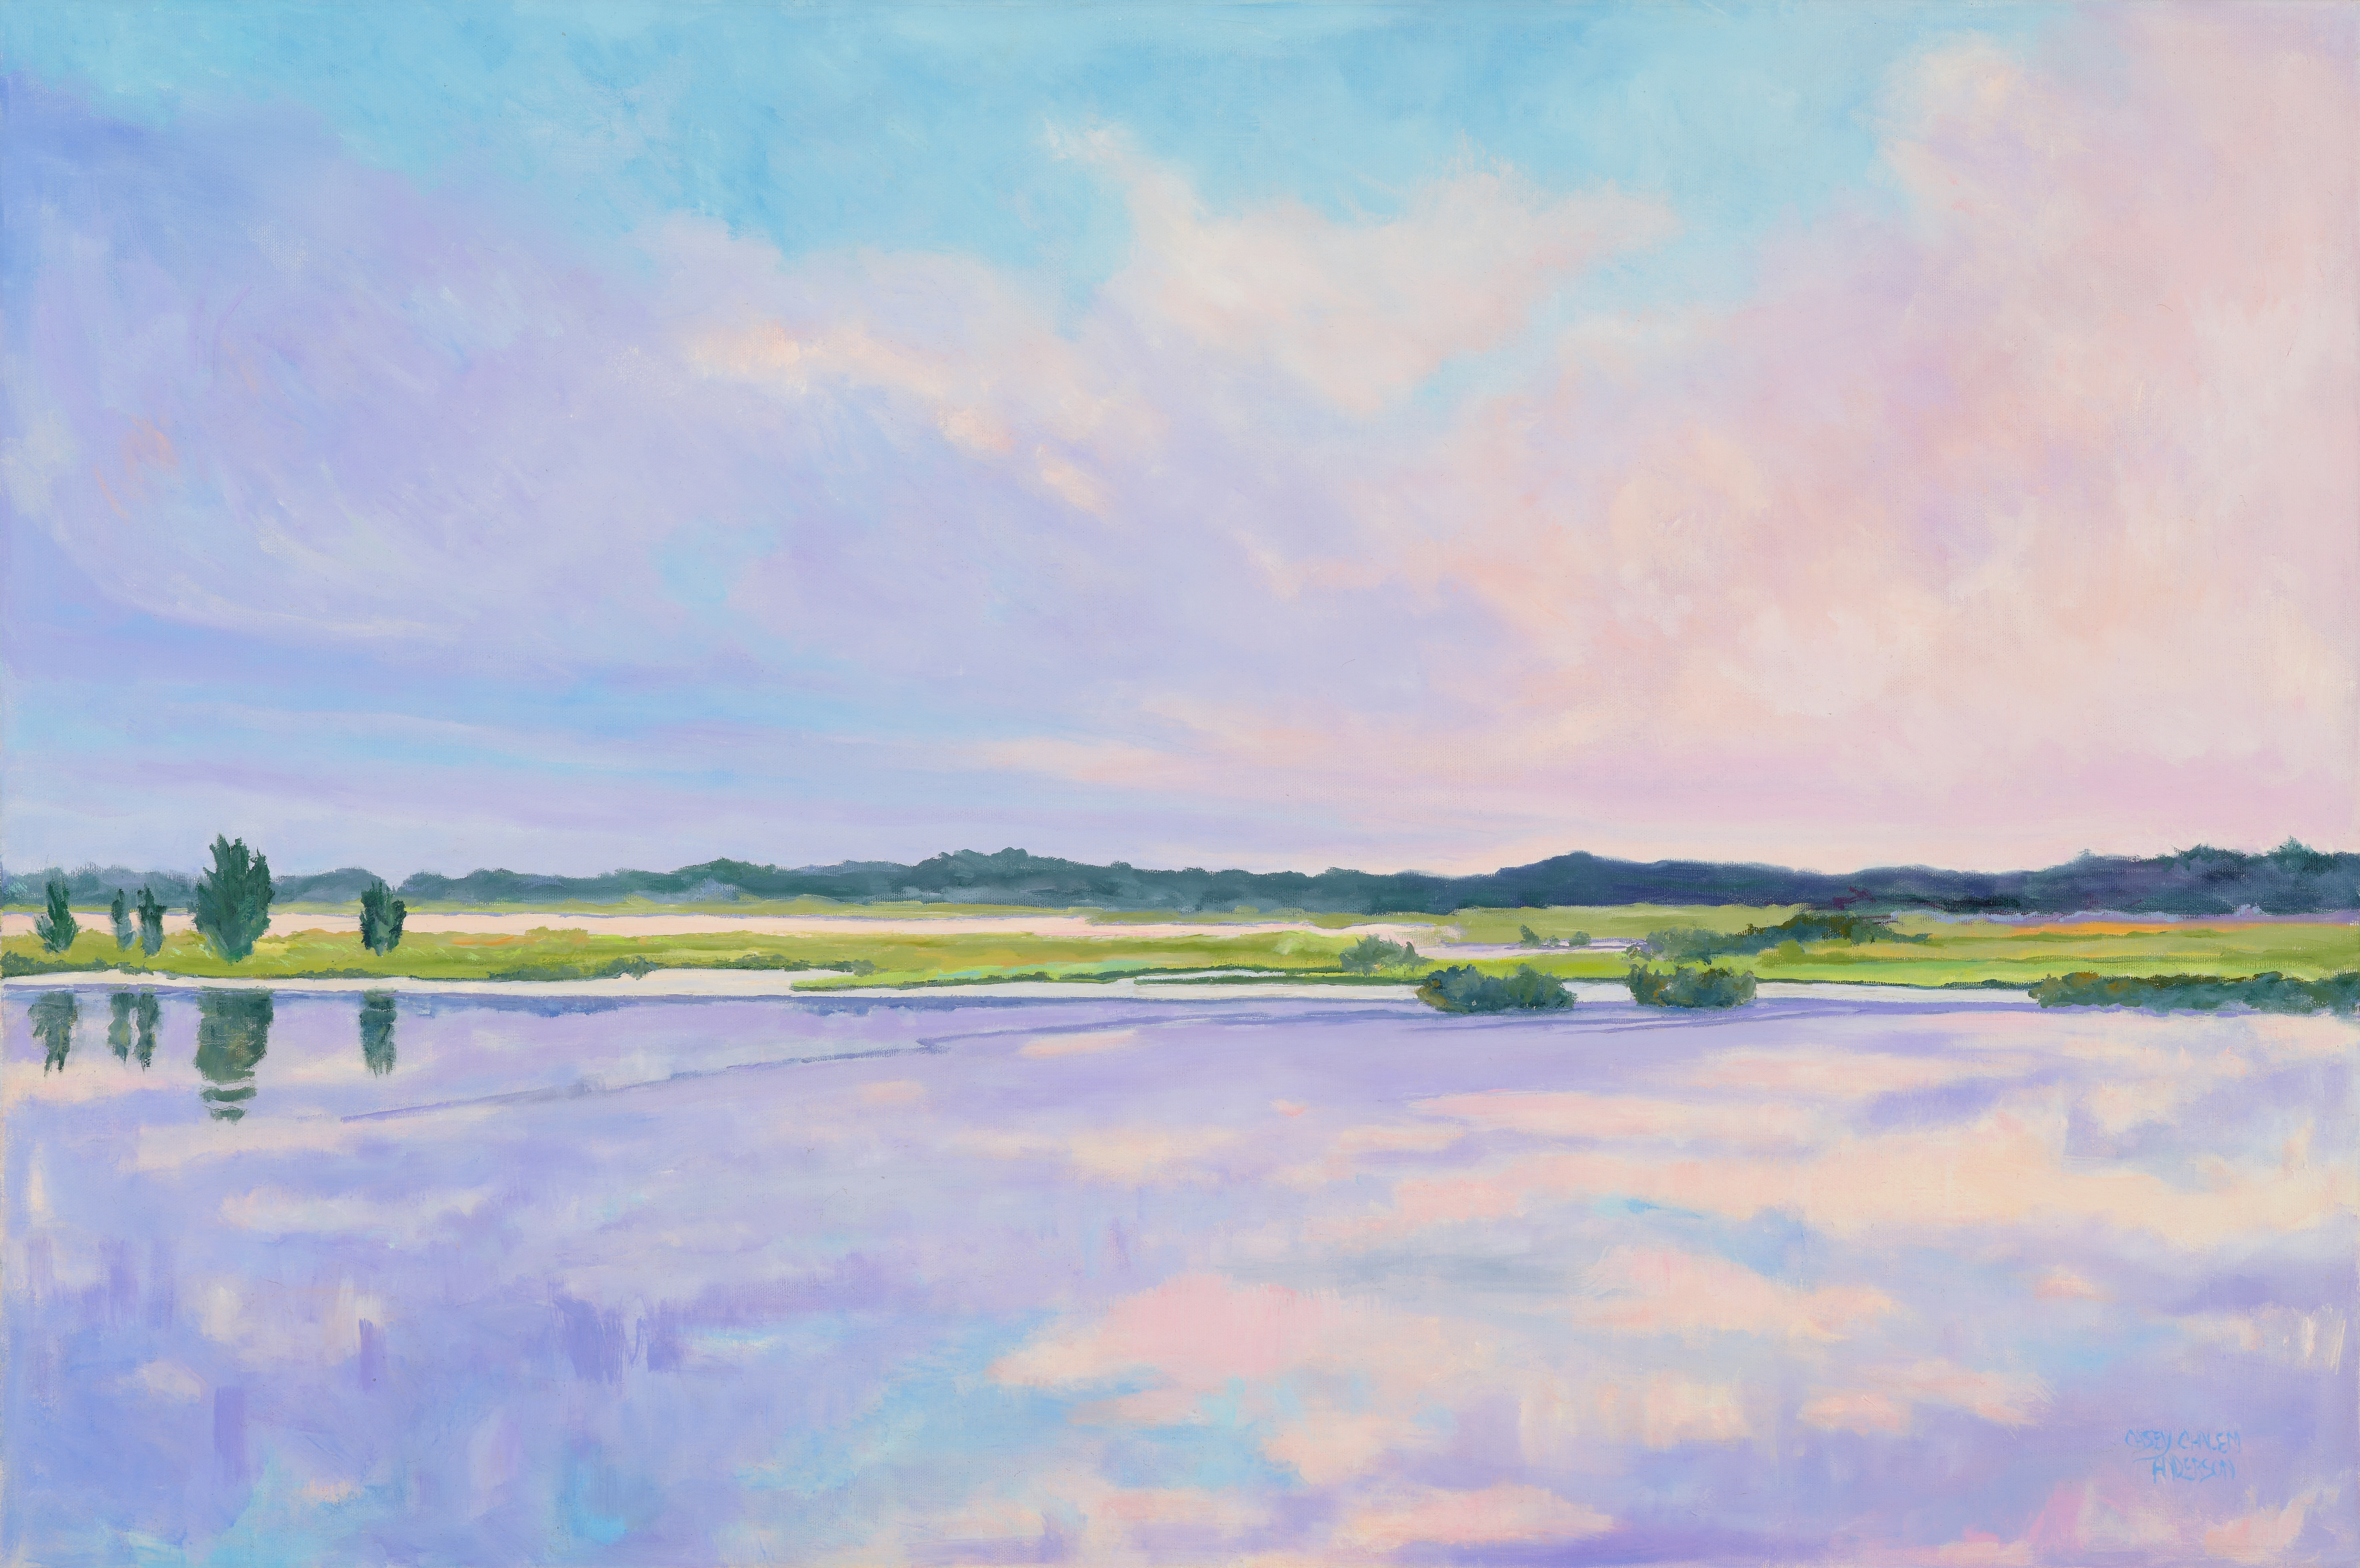 "Lavender Before Twilight" (oil on canvas, 24" x 36") by Casey Chalem Anderson